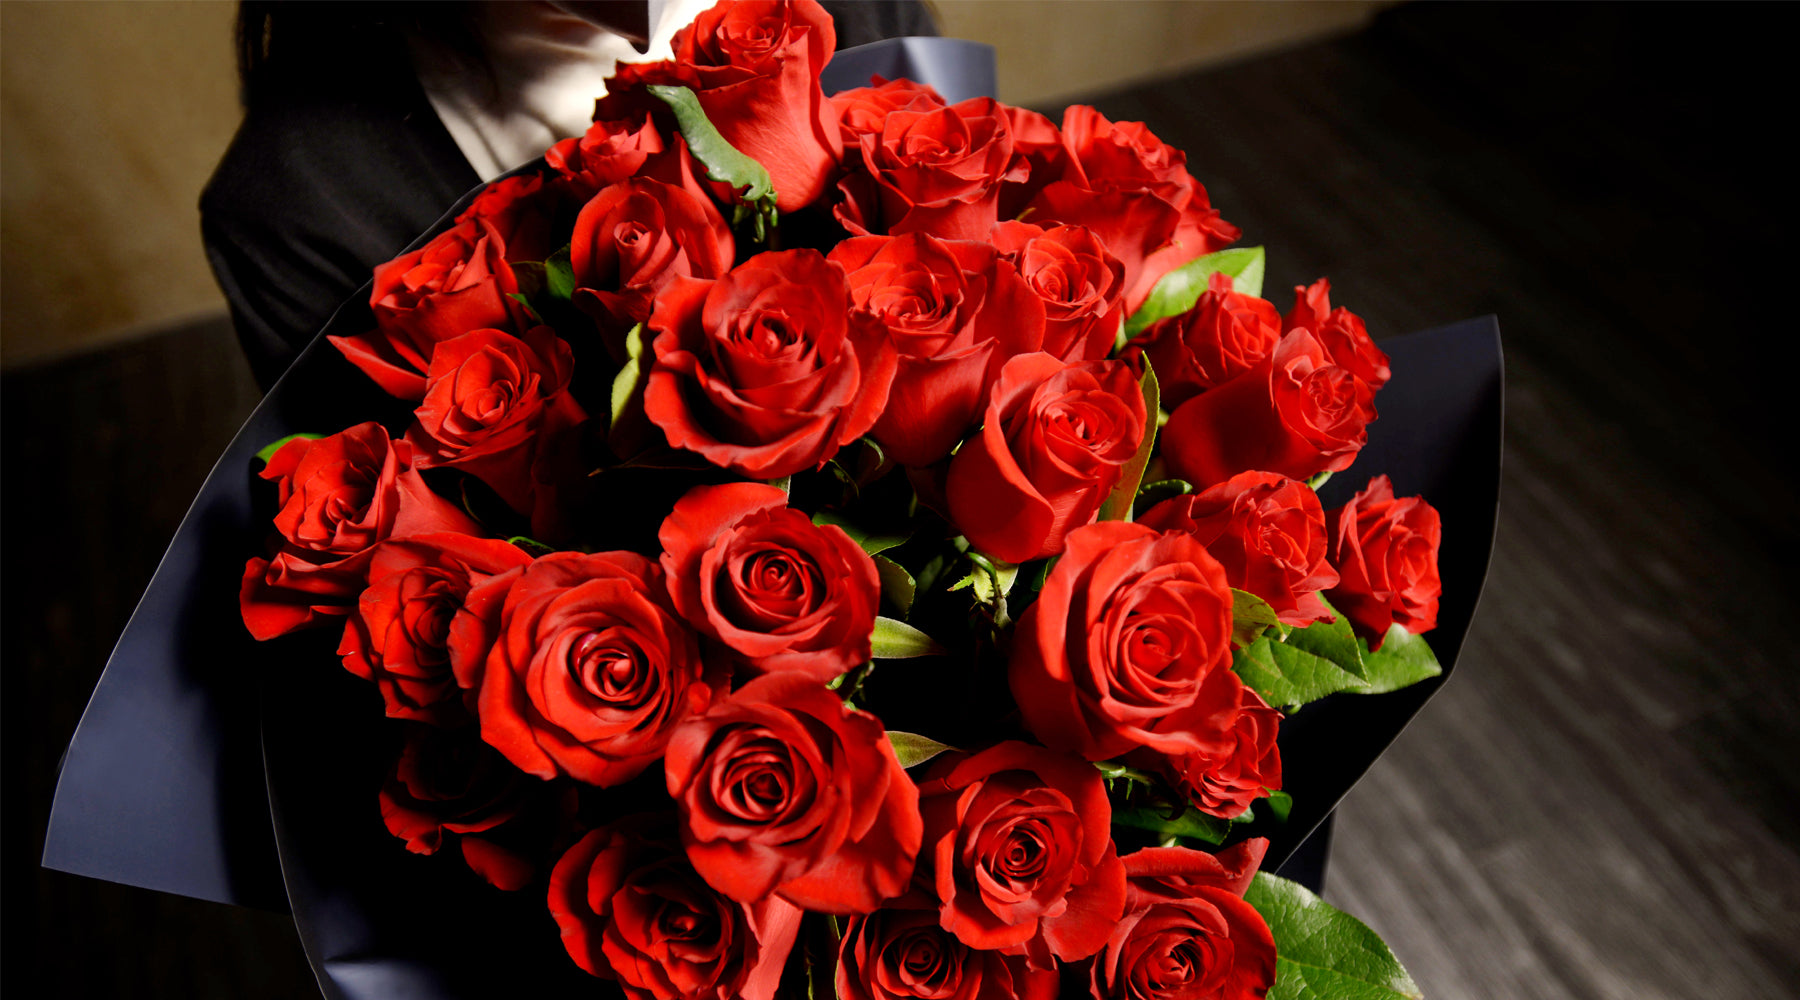 Prepare the sweetest rose for your loved one this Valentine’s Day